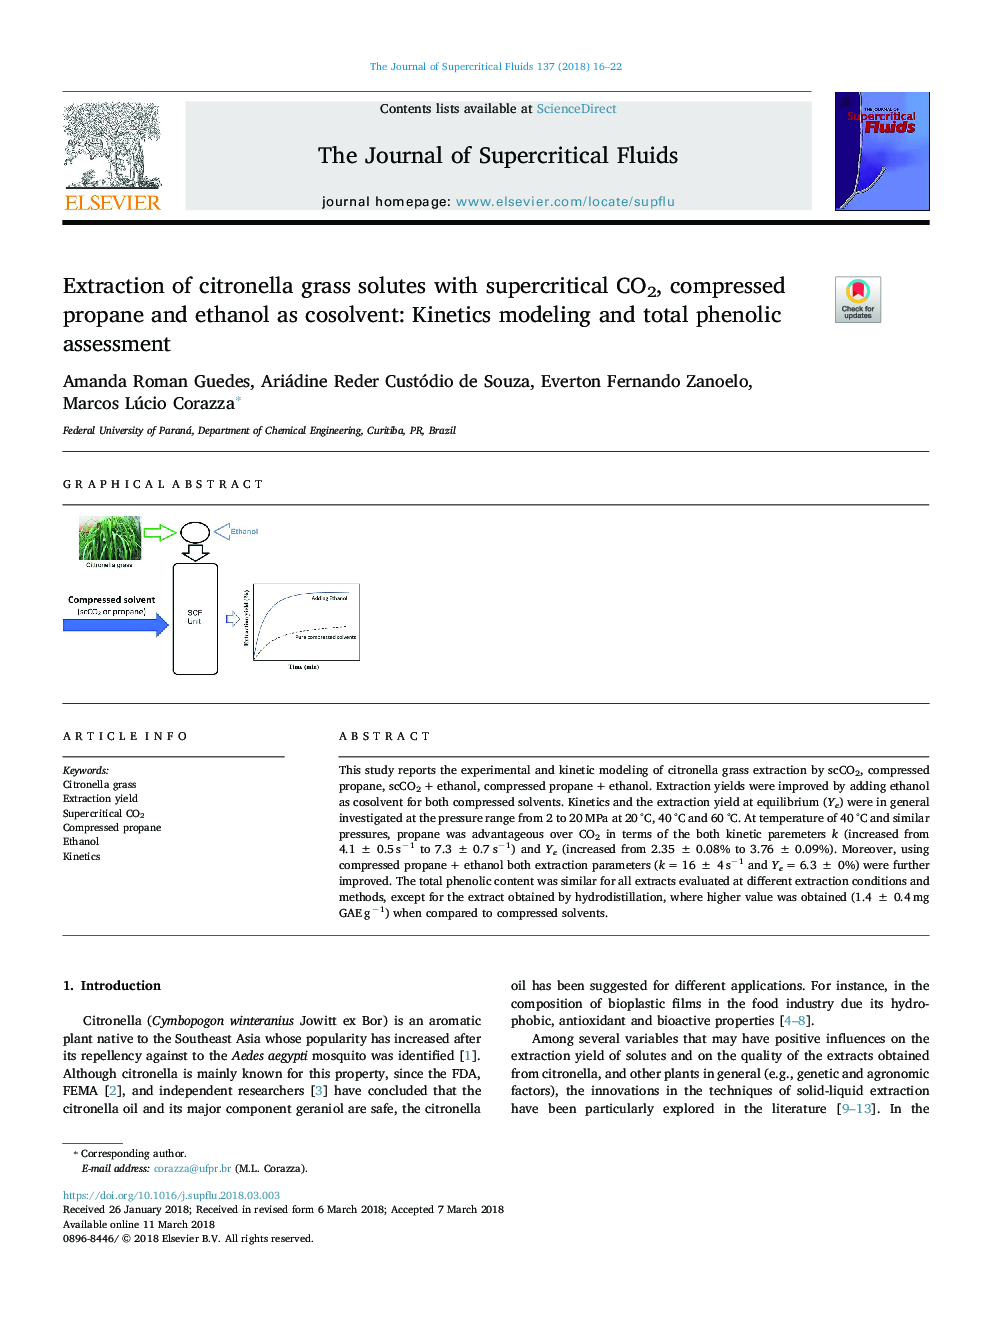 Extraction of citronella grass solutes with supercritical CO2, compressed propane and ethanol as cosolvent: Kinetics modeling and total phenolic assessment